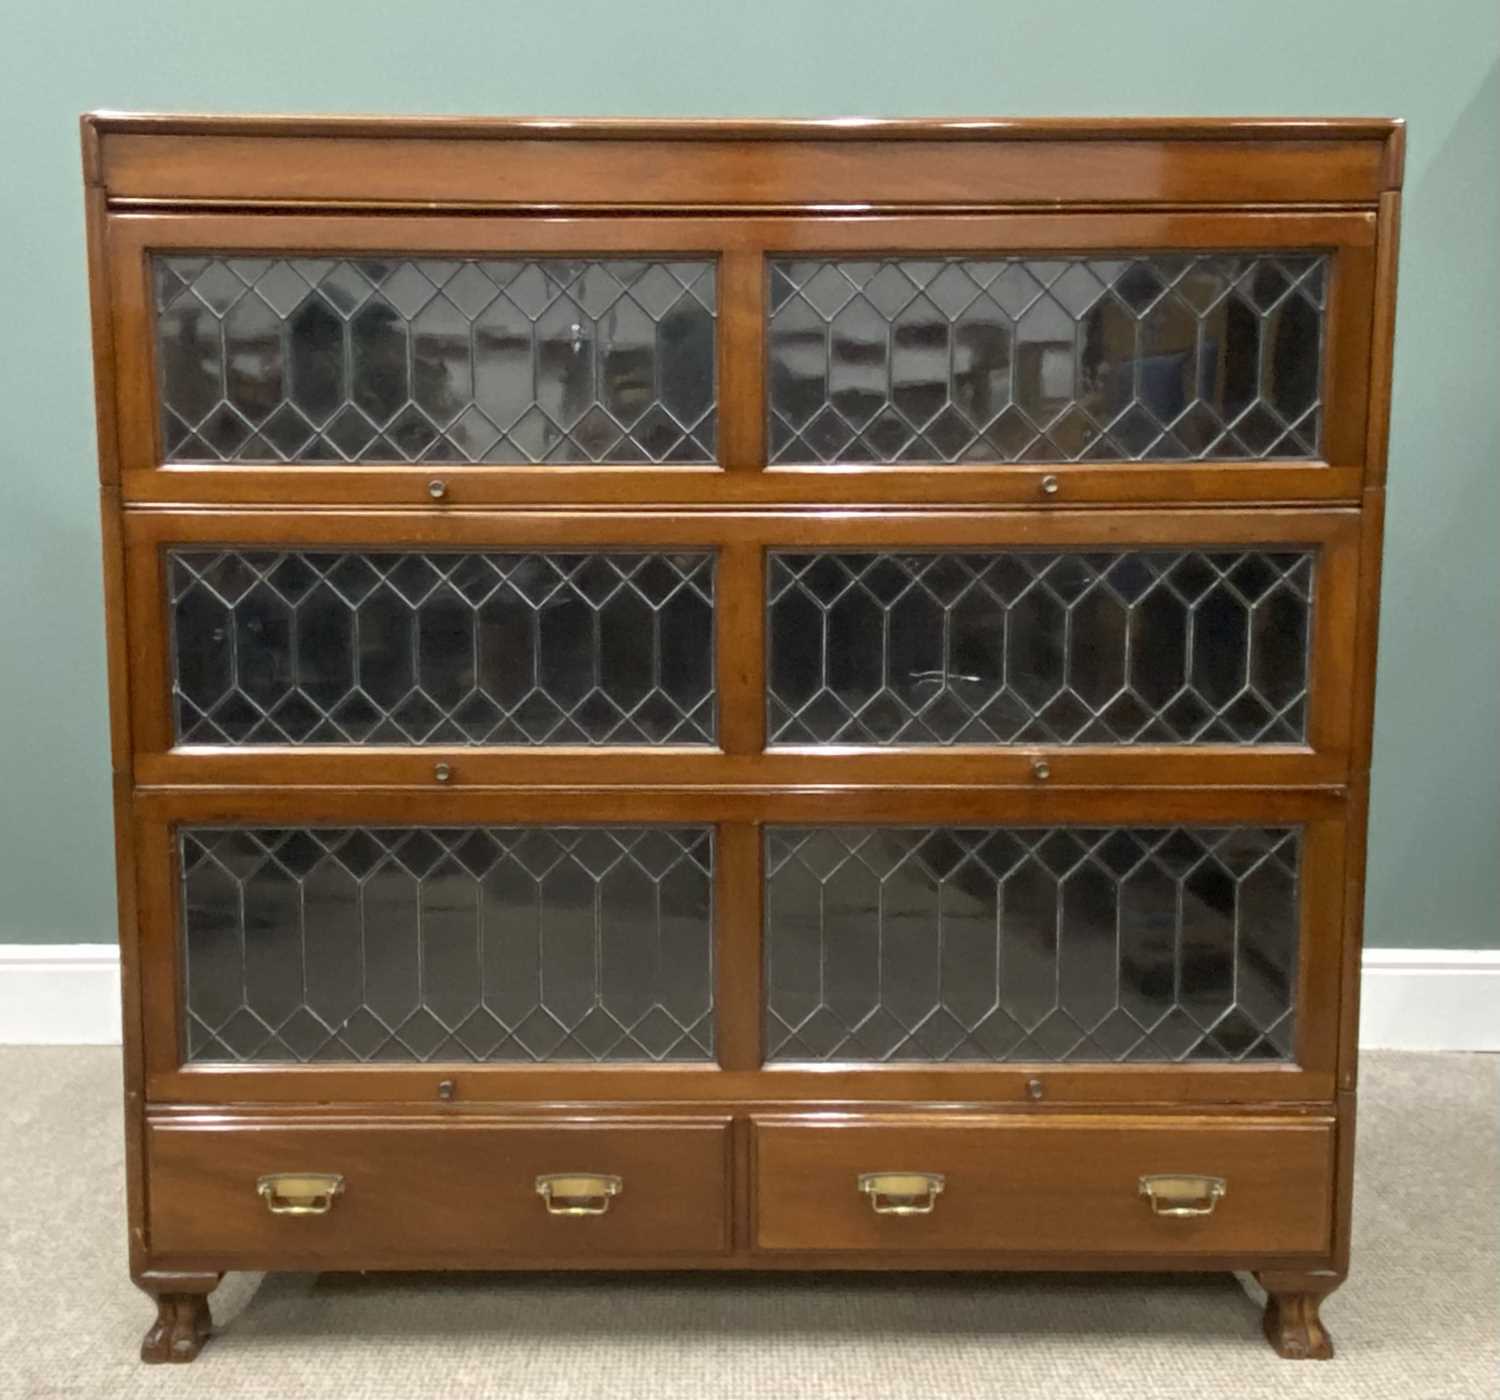 VINTAGE MAHOGANY LIBRARY BOOKCASE having three leaded glass letterbox doors over two drawers - Image 2 of 11